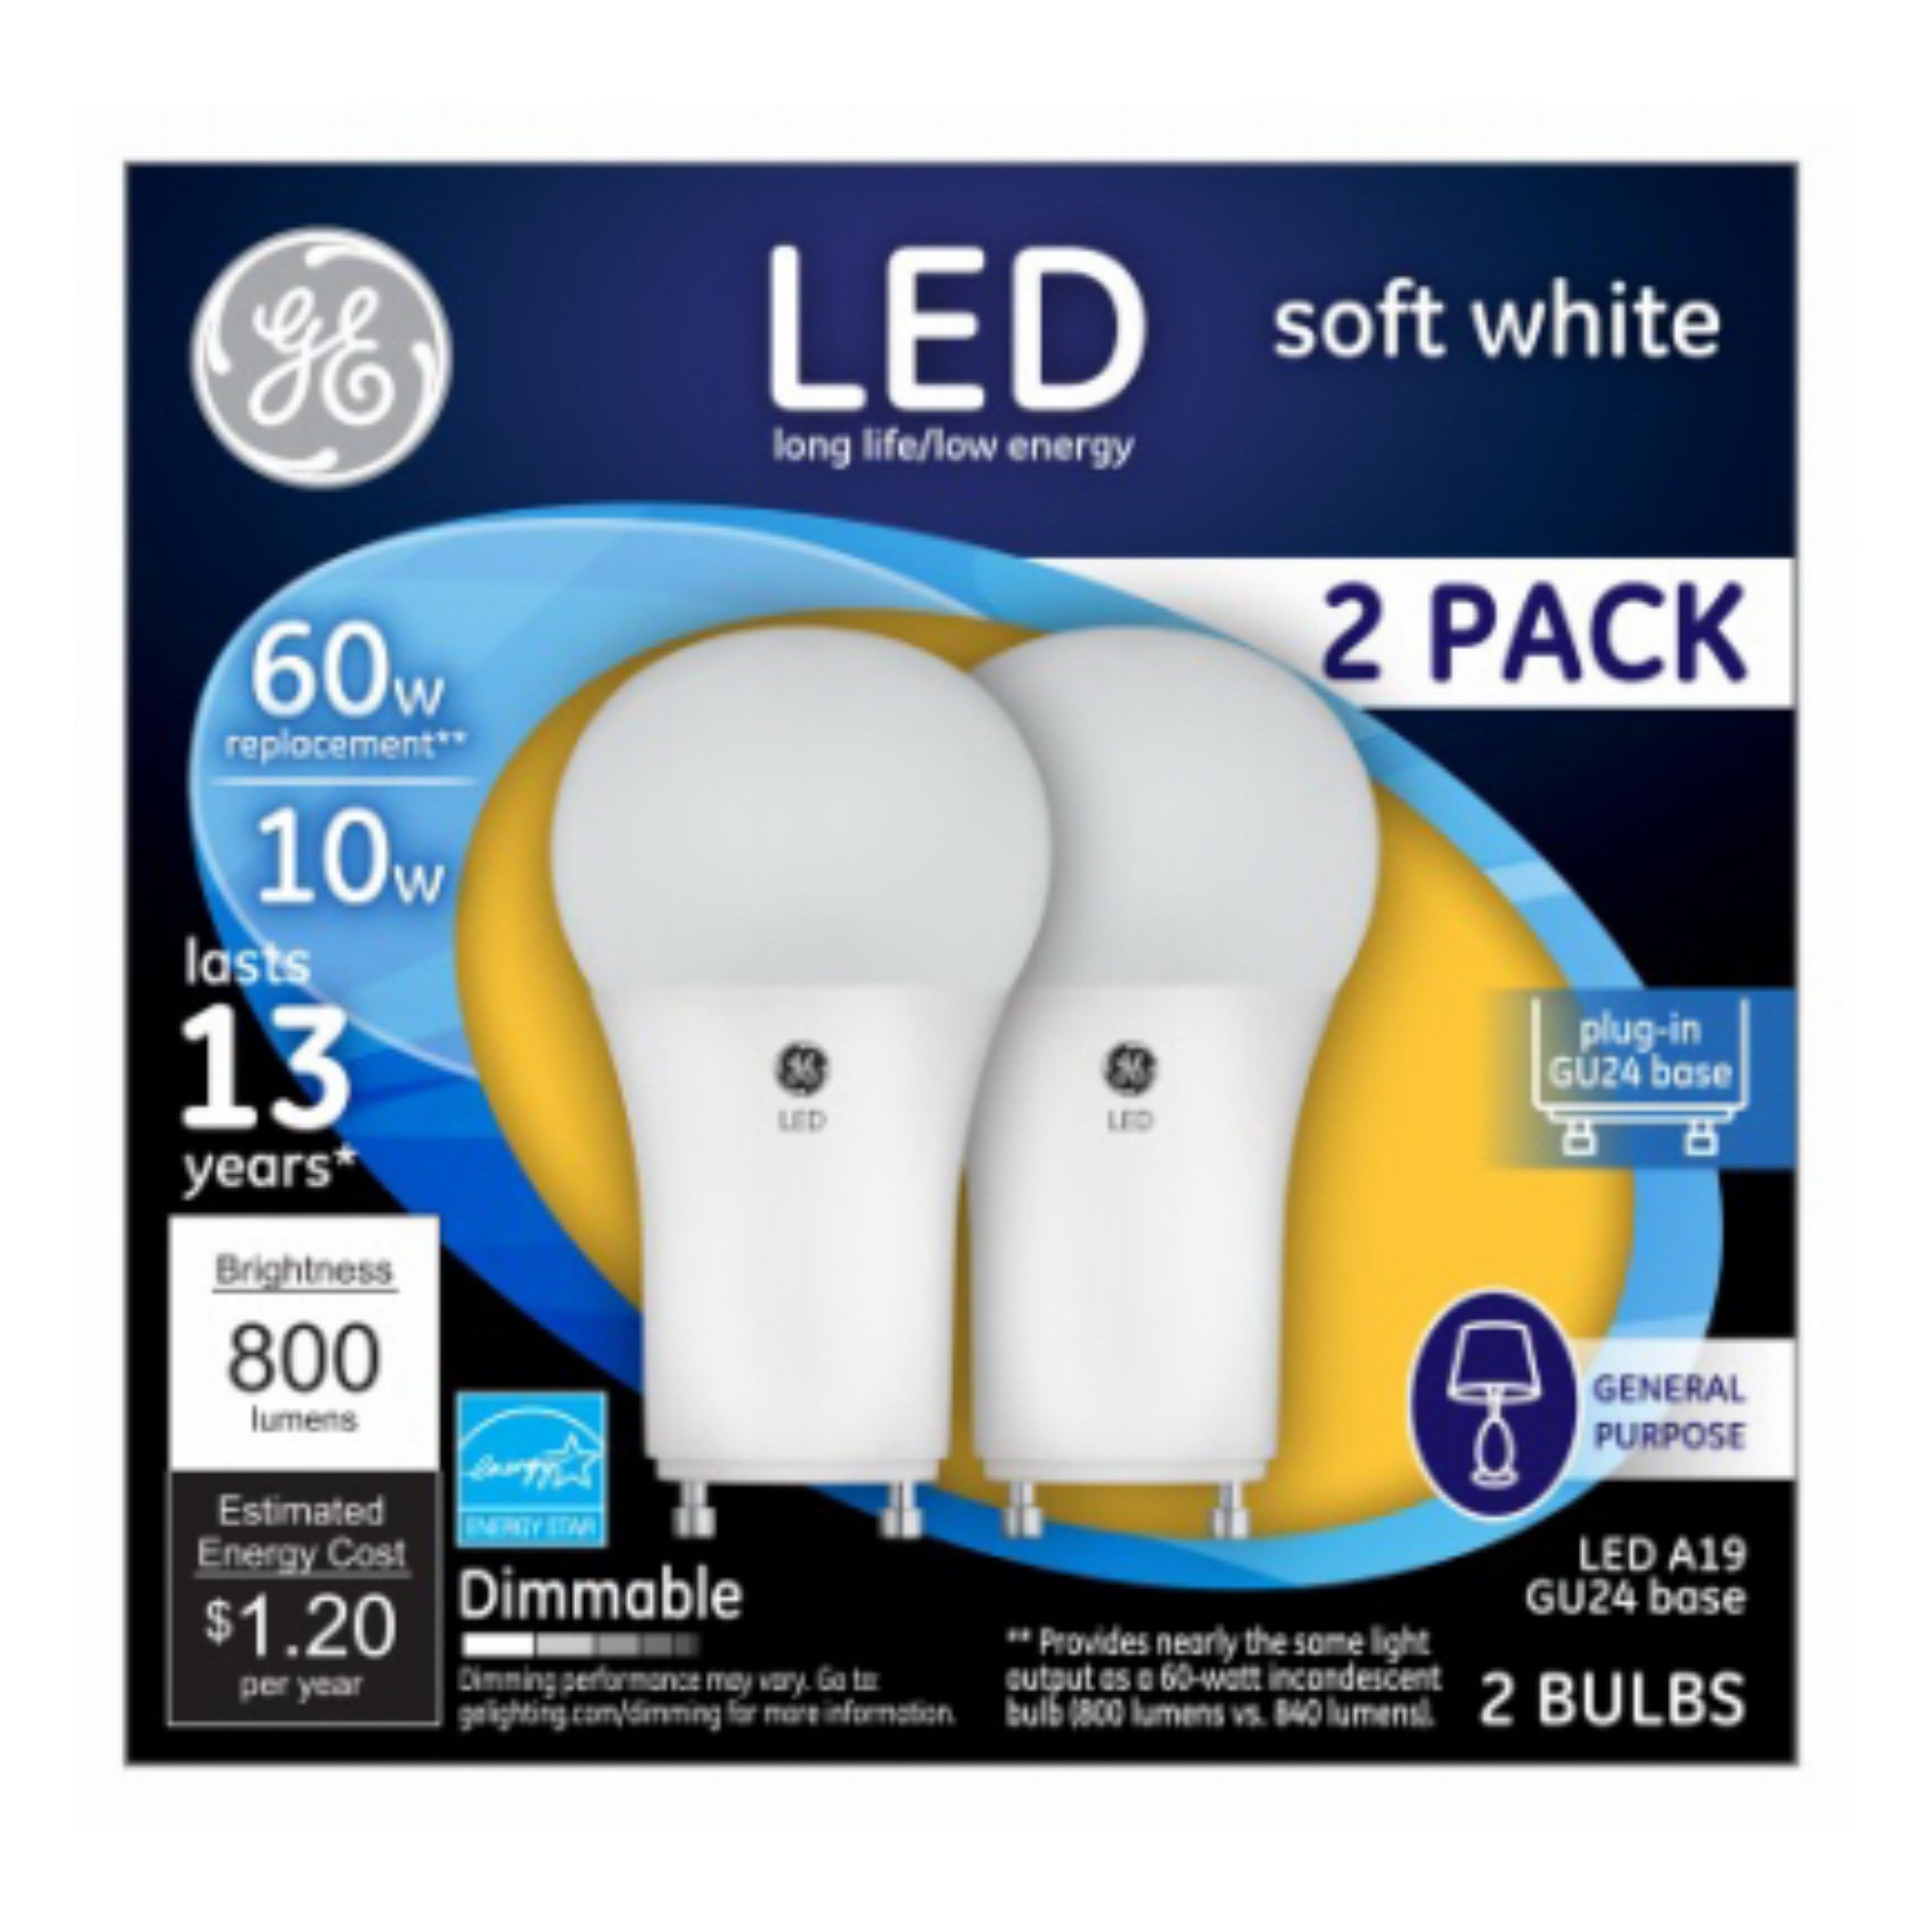 GE LED A19 GU24 Plug In Base Dimmable 60W Replacement – Soft White – 2 Pack